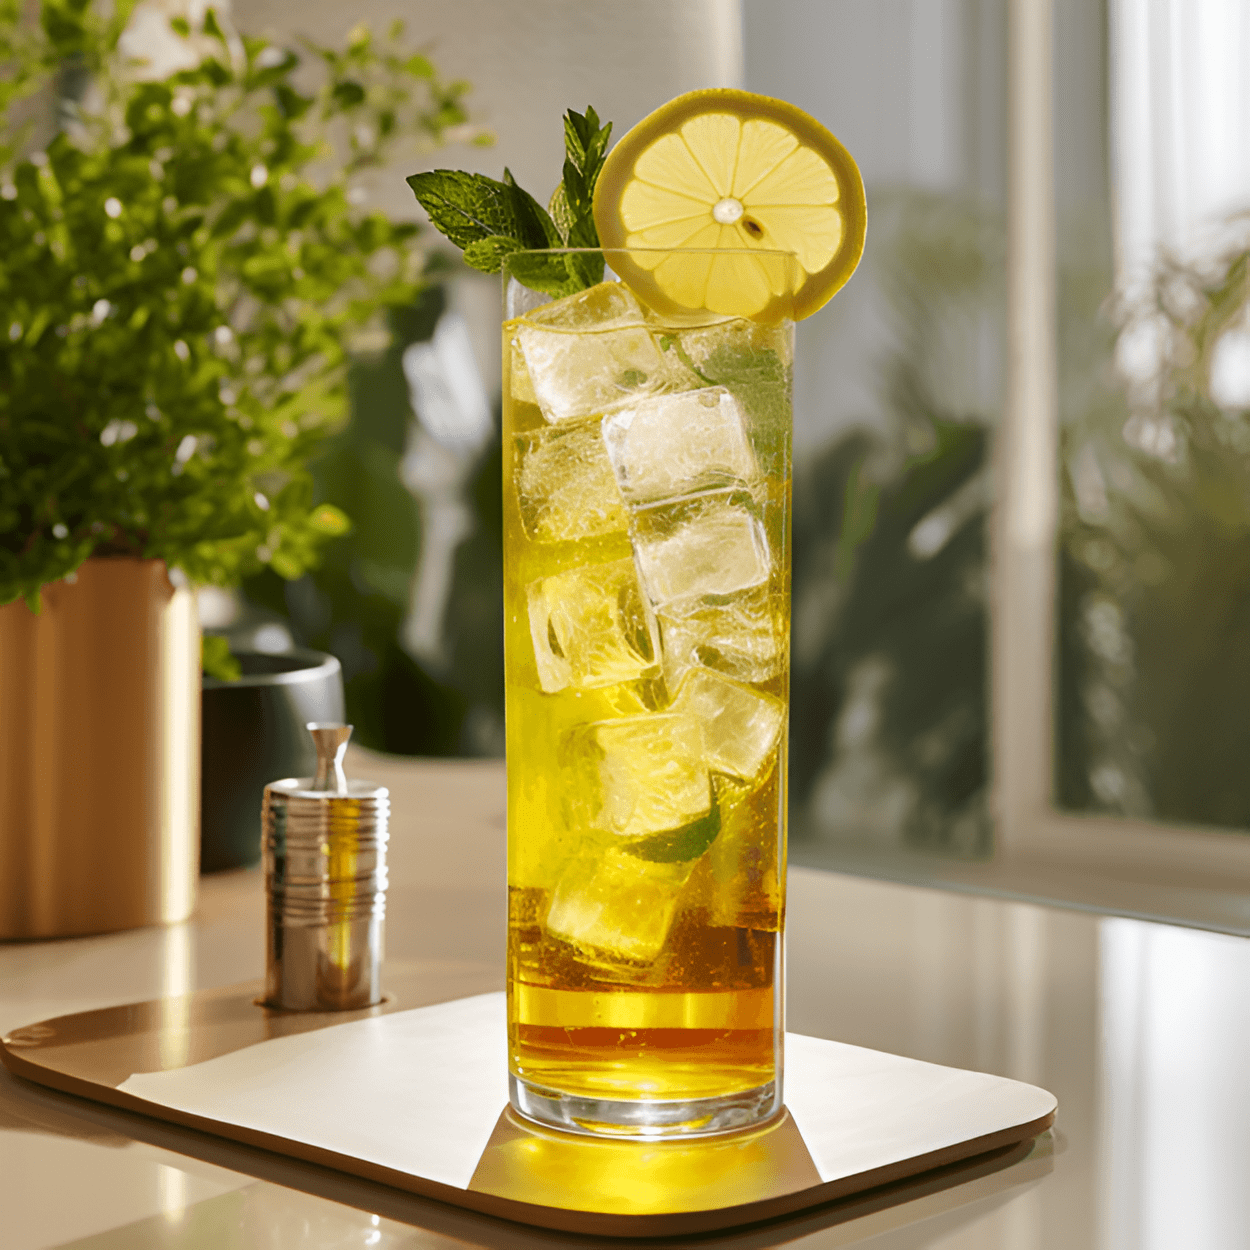 Green Tea Highball Cocktail Recipe - The Green Tea Highball has a light, refreshing taste with a subtle earthiness from the green tea. It's slightly sweet, with a hint of citrus from the lemon, and a gentle effervescence from the soda water.